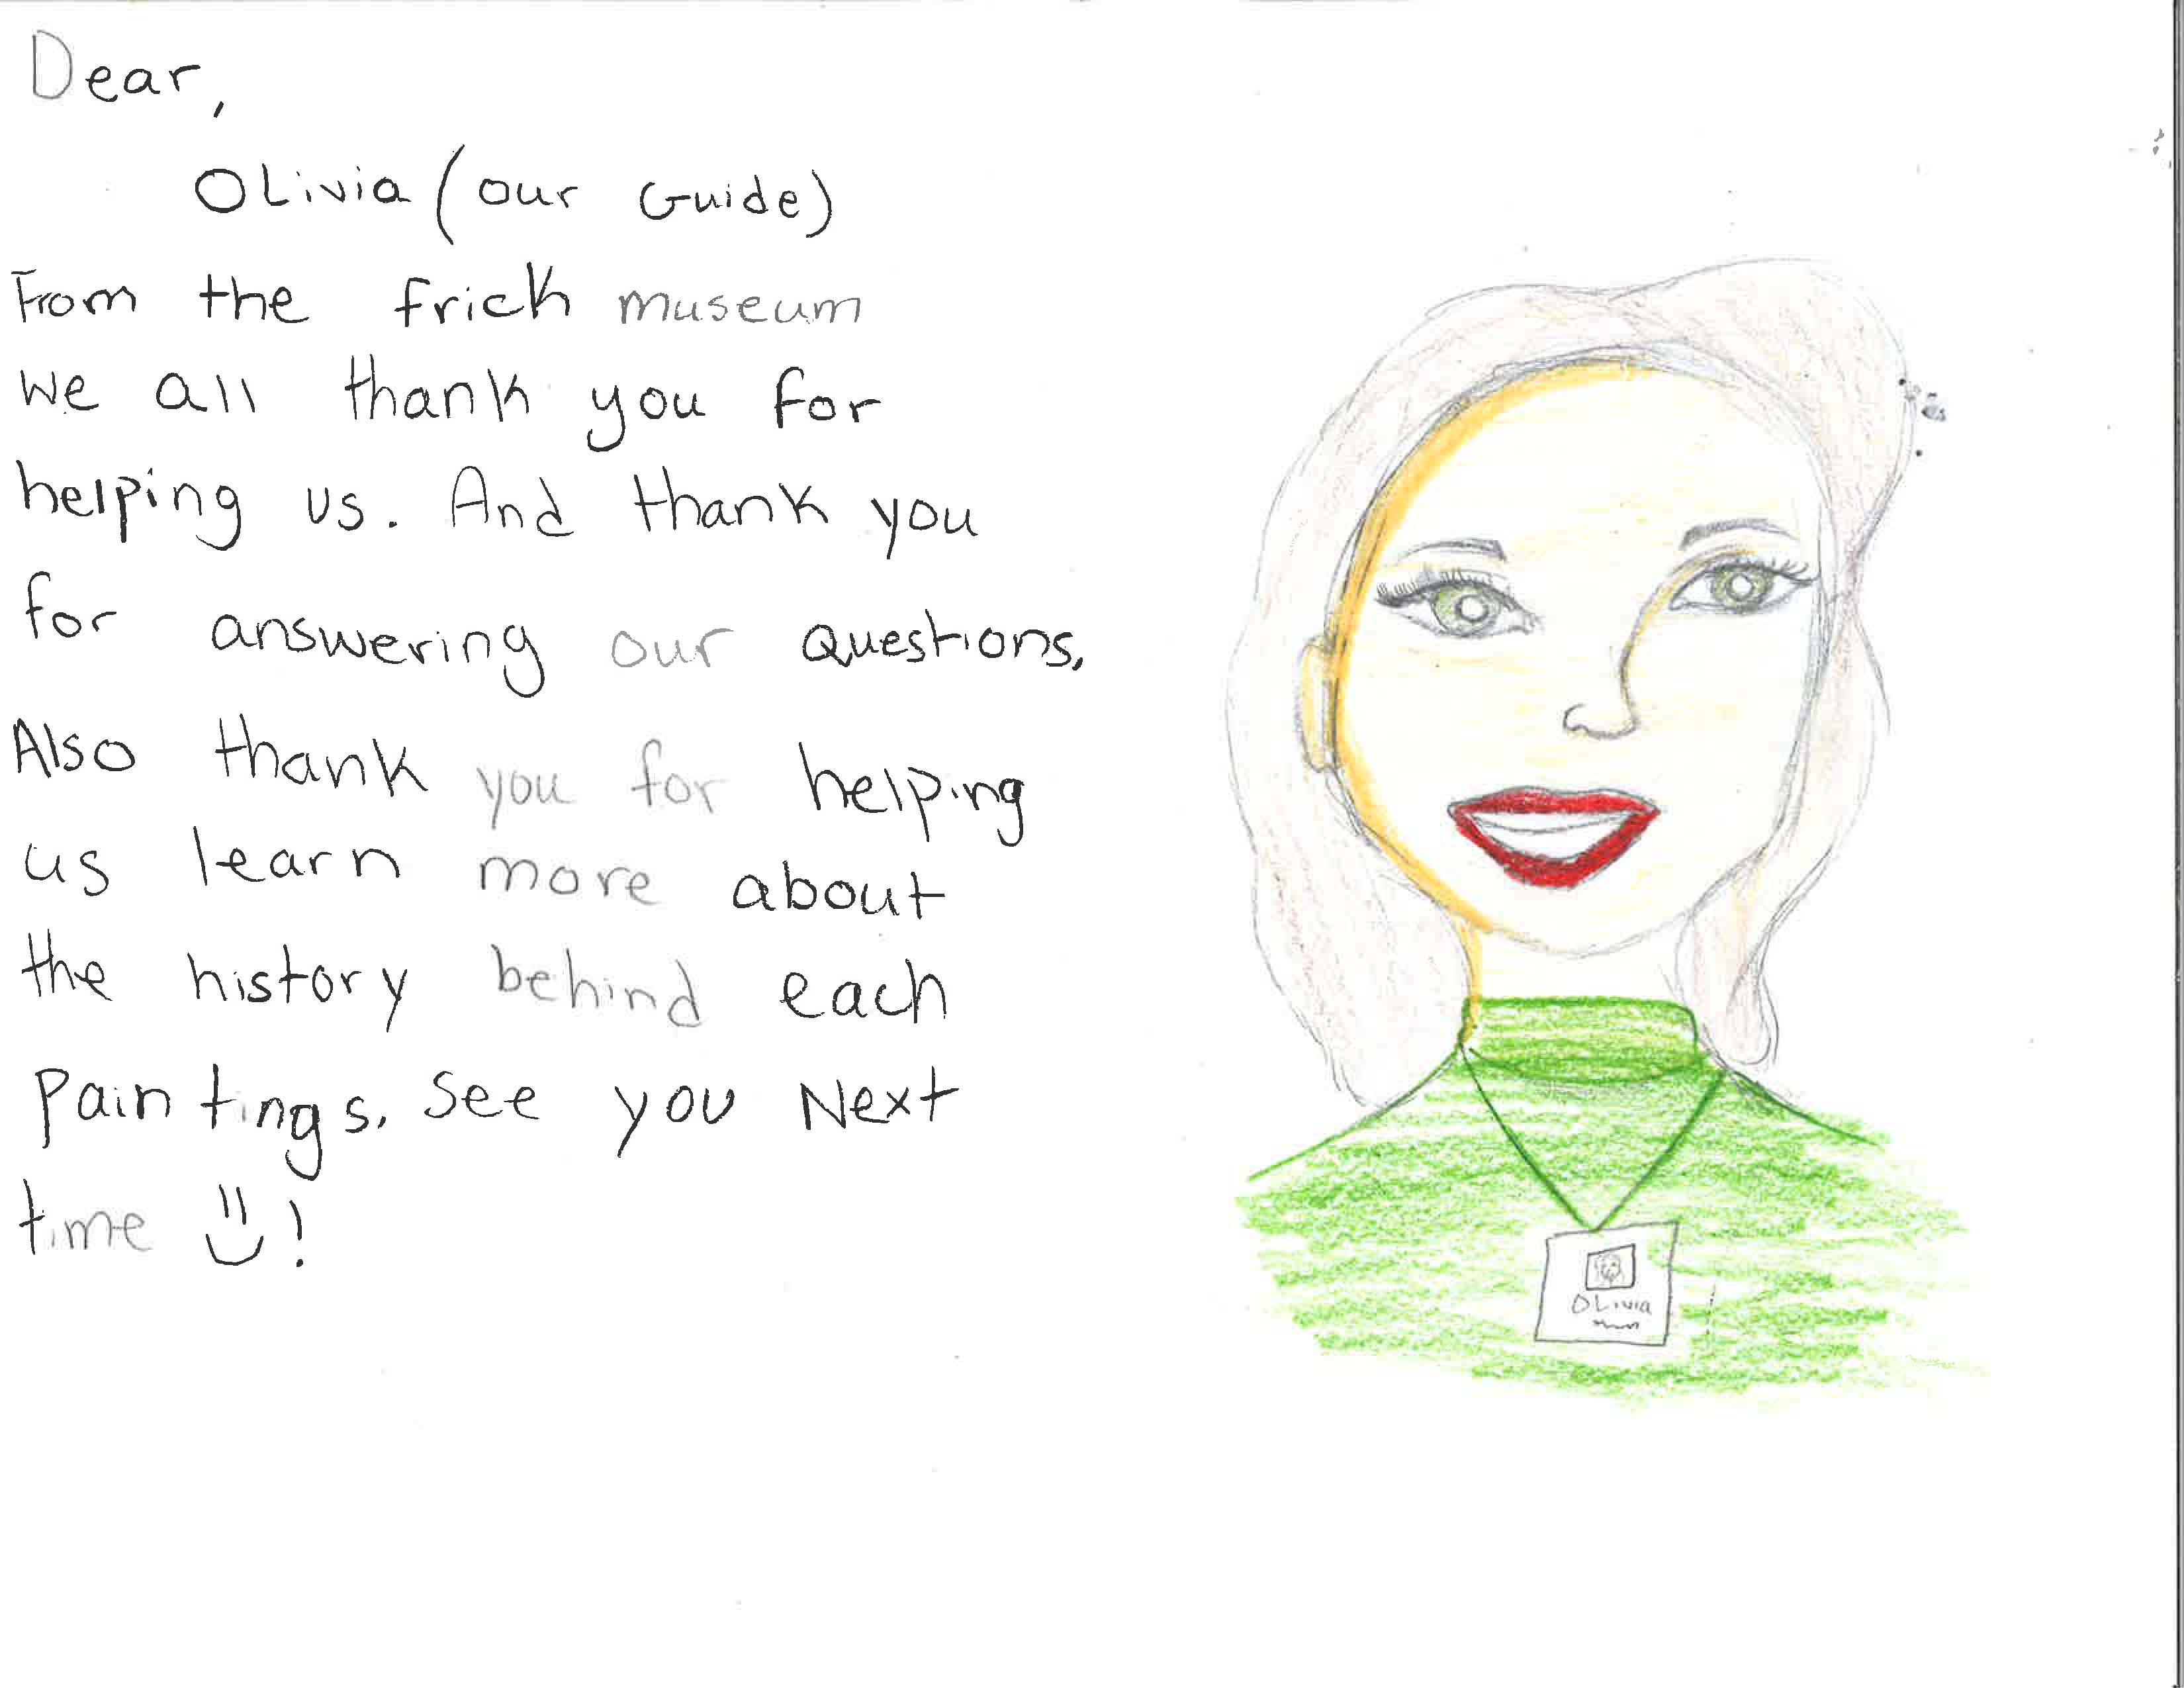 letter from Student with drawing of woman